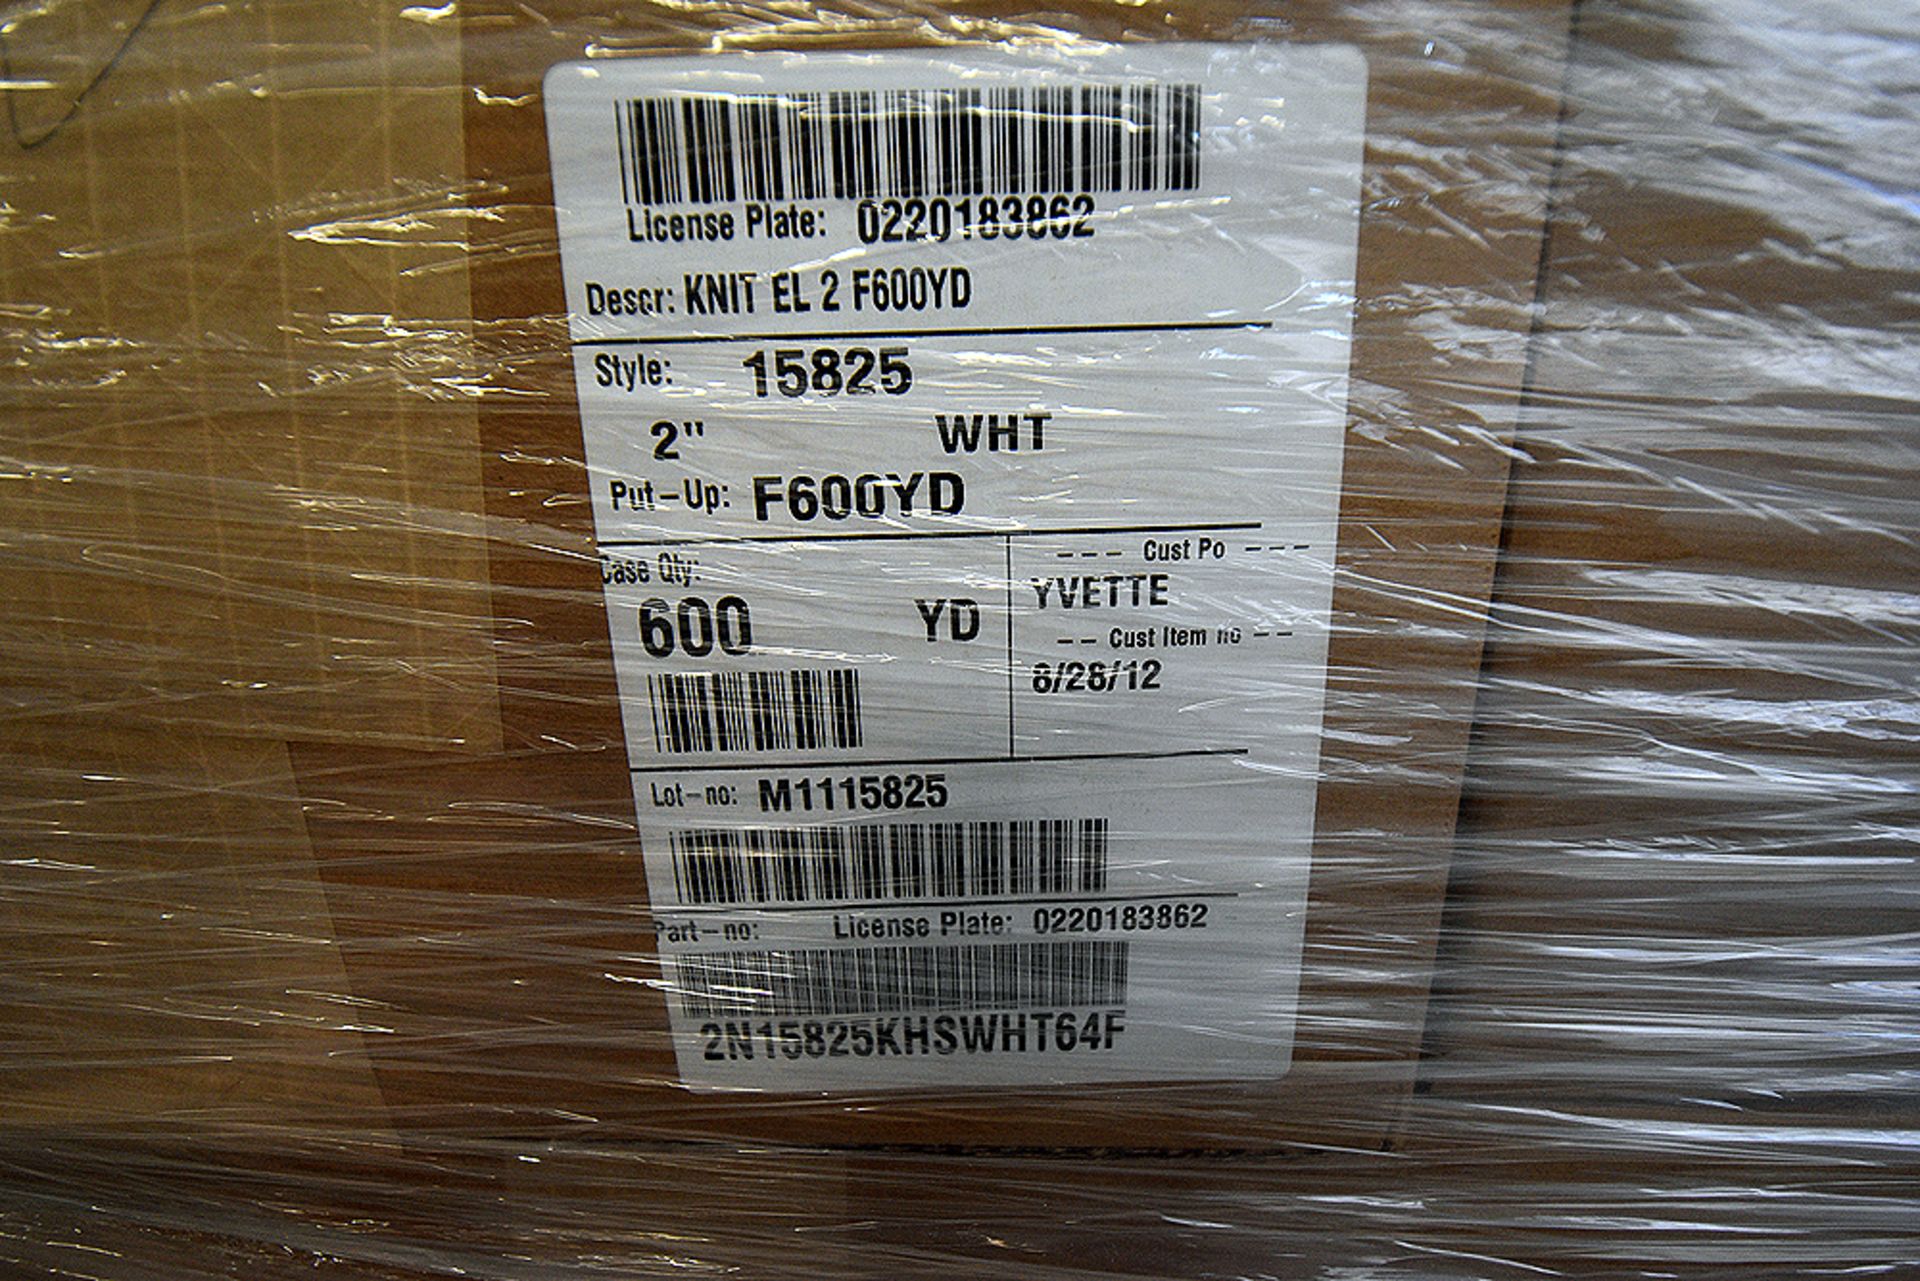 Cases of White 2"x600yd. Elastic - Image 2 of 3